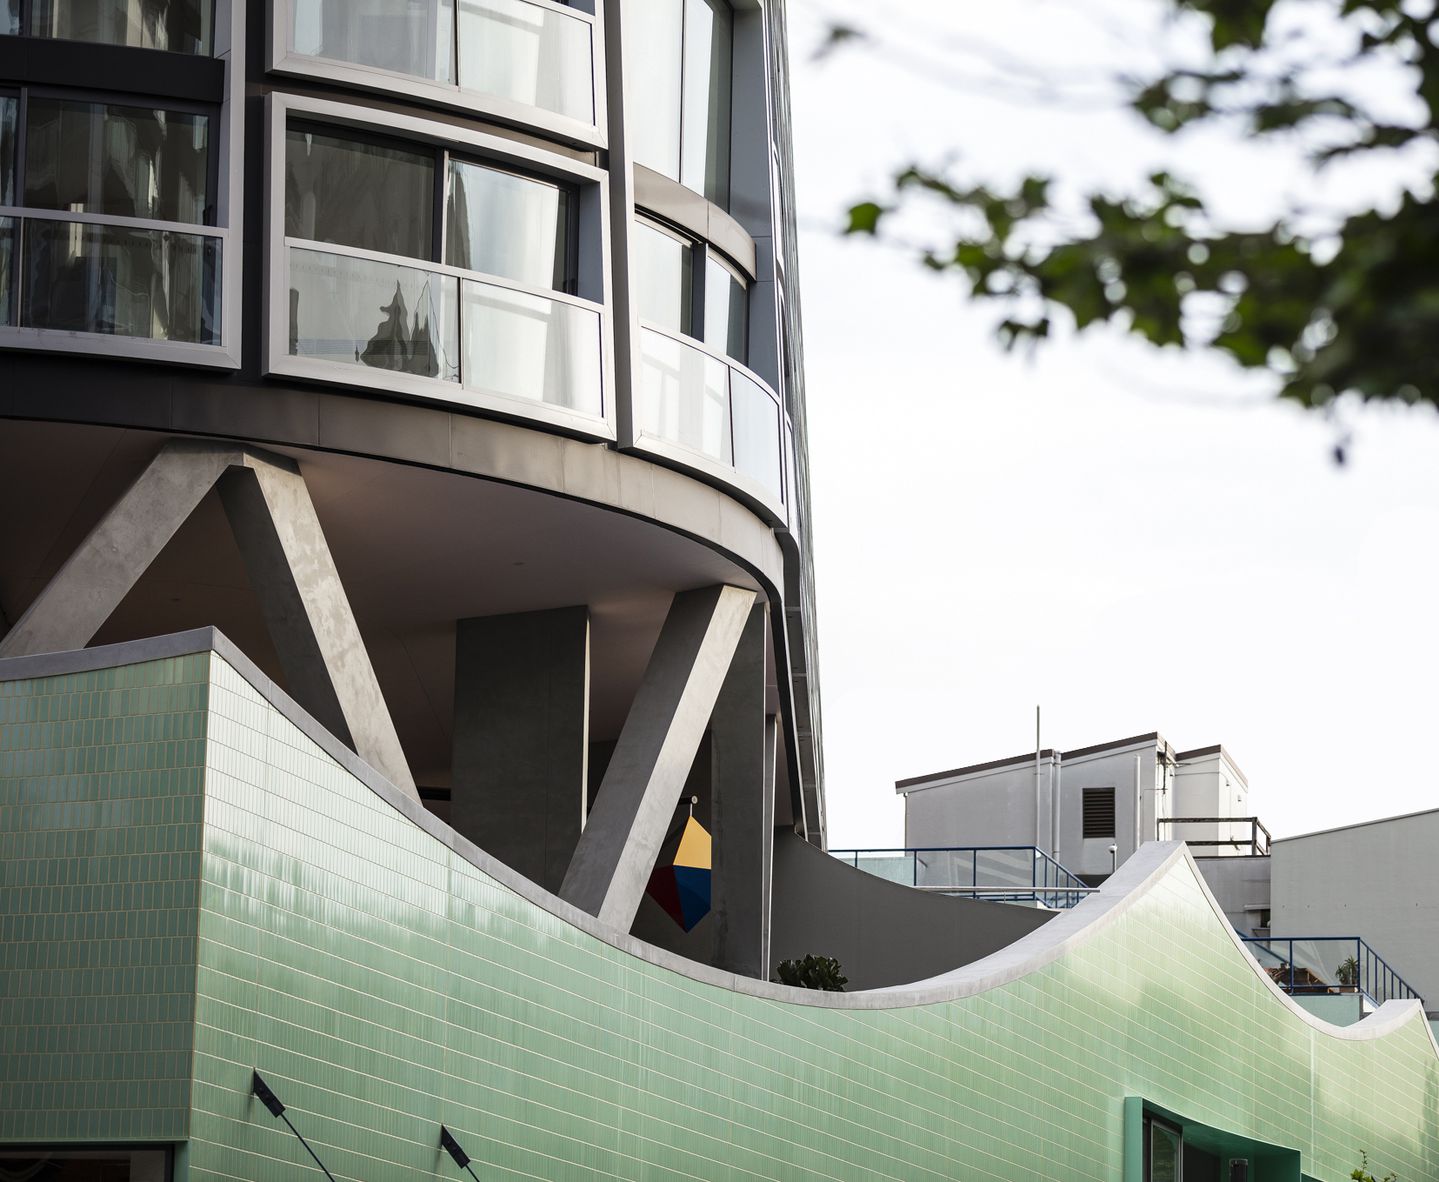 Omnia Potts Point apartments designed by Durbach Block Jaggers Architects Sydney